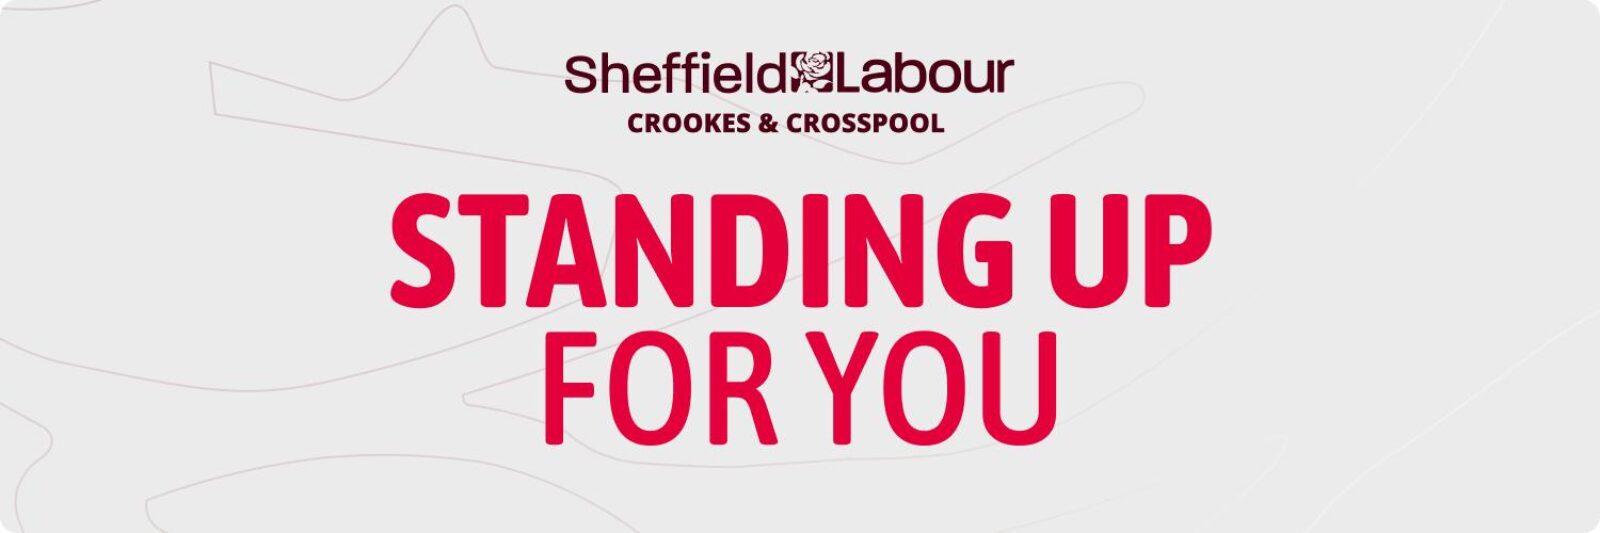 Crookes & Crosspool Labour - standing up for you